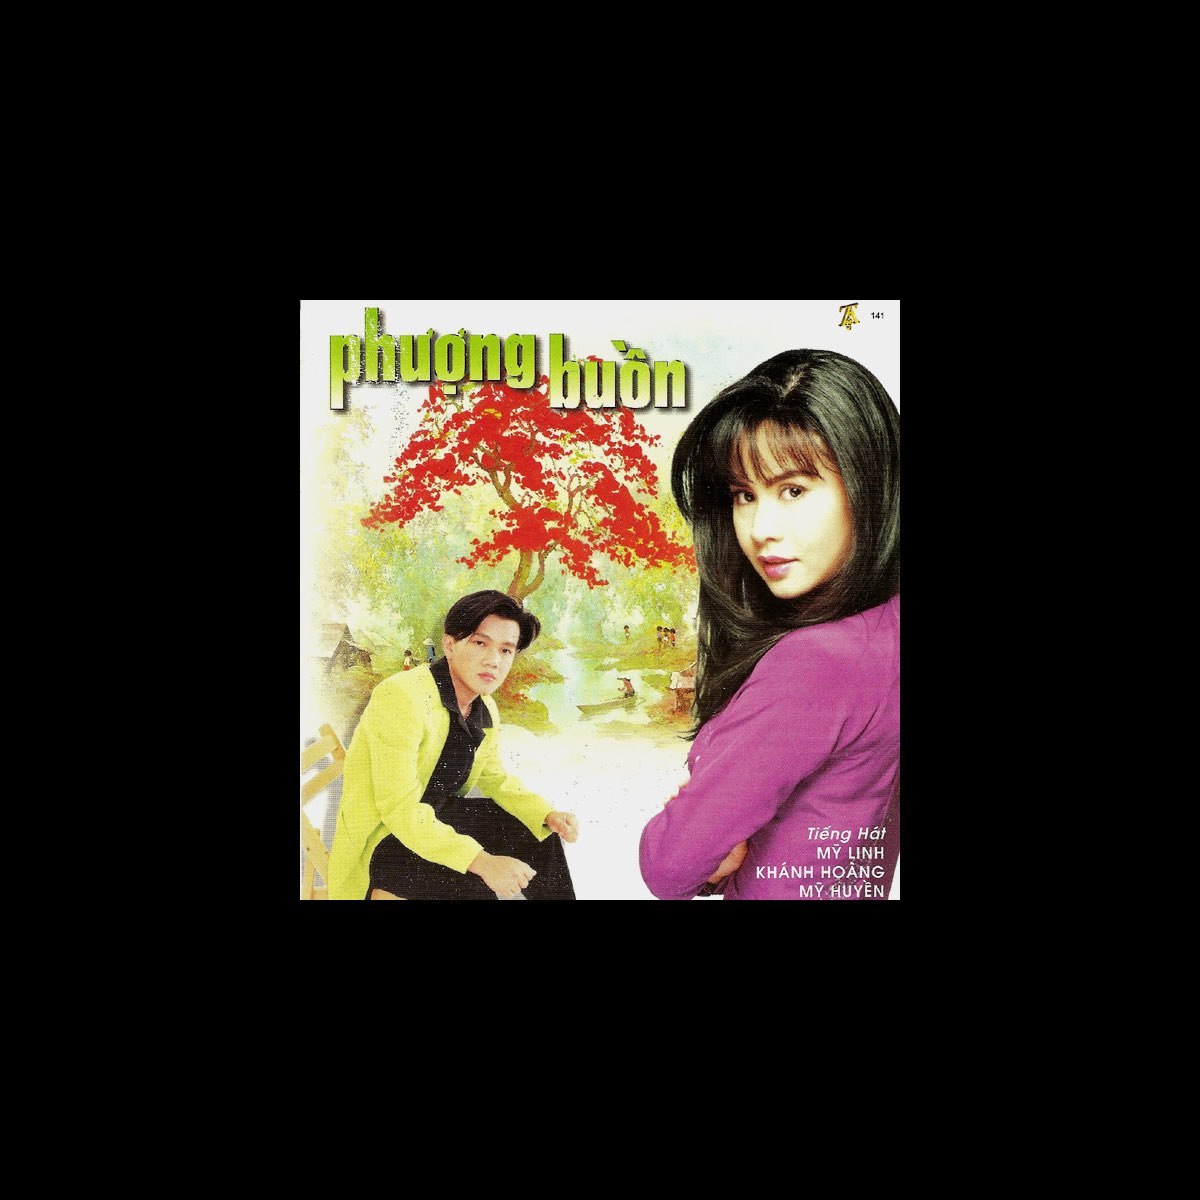 ‎Phuong Buon by Various Artists on Apple Music